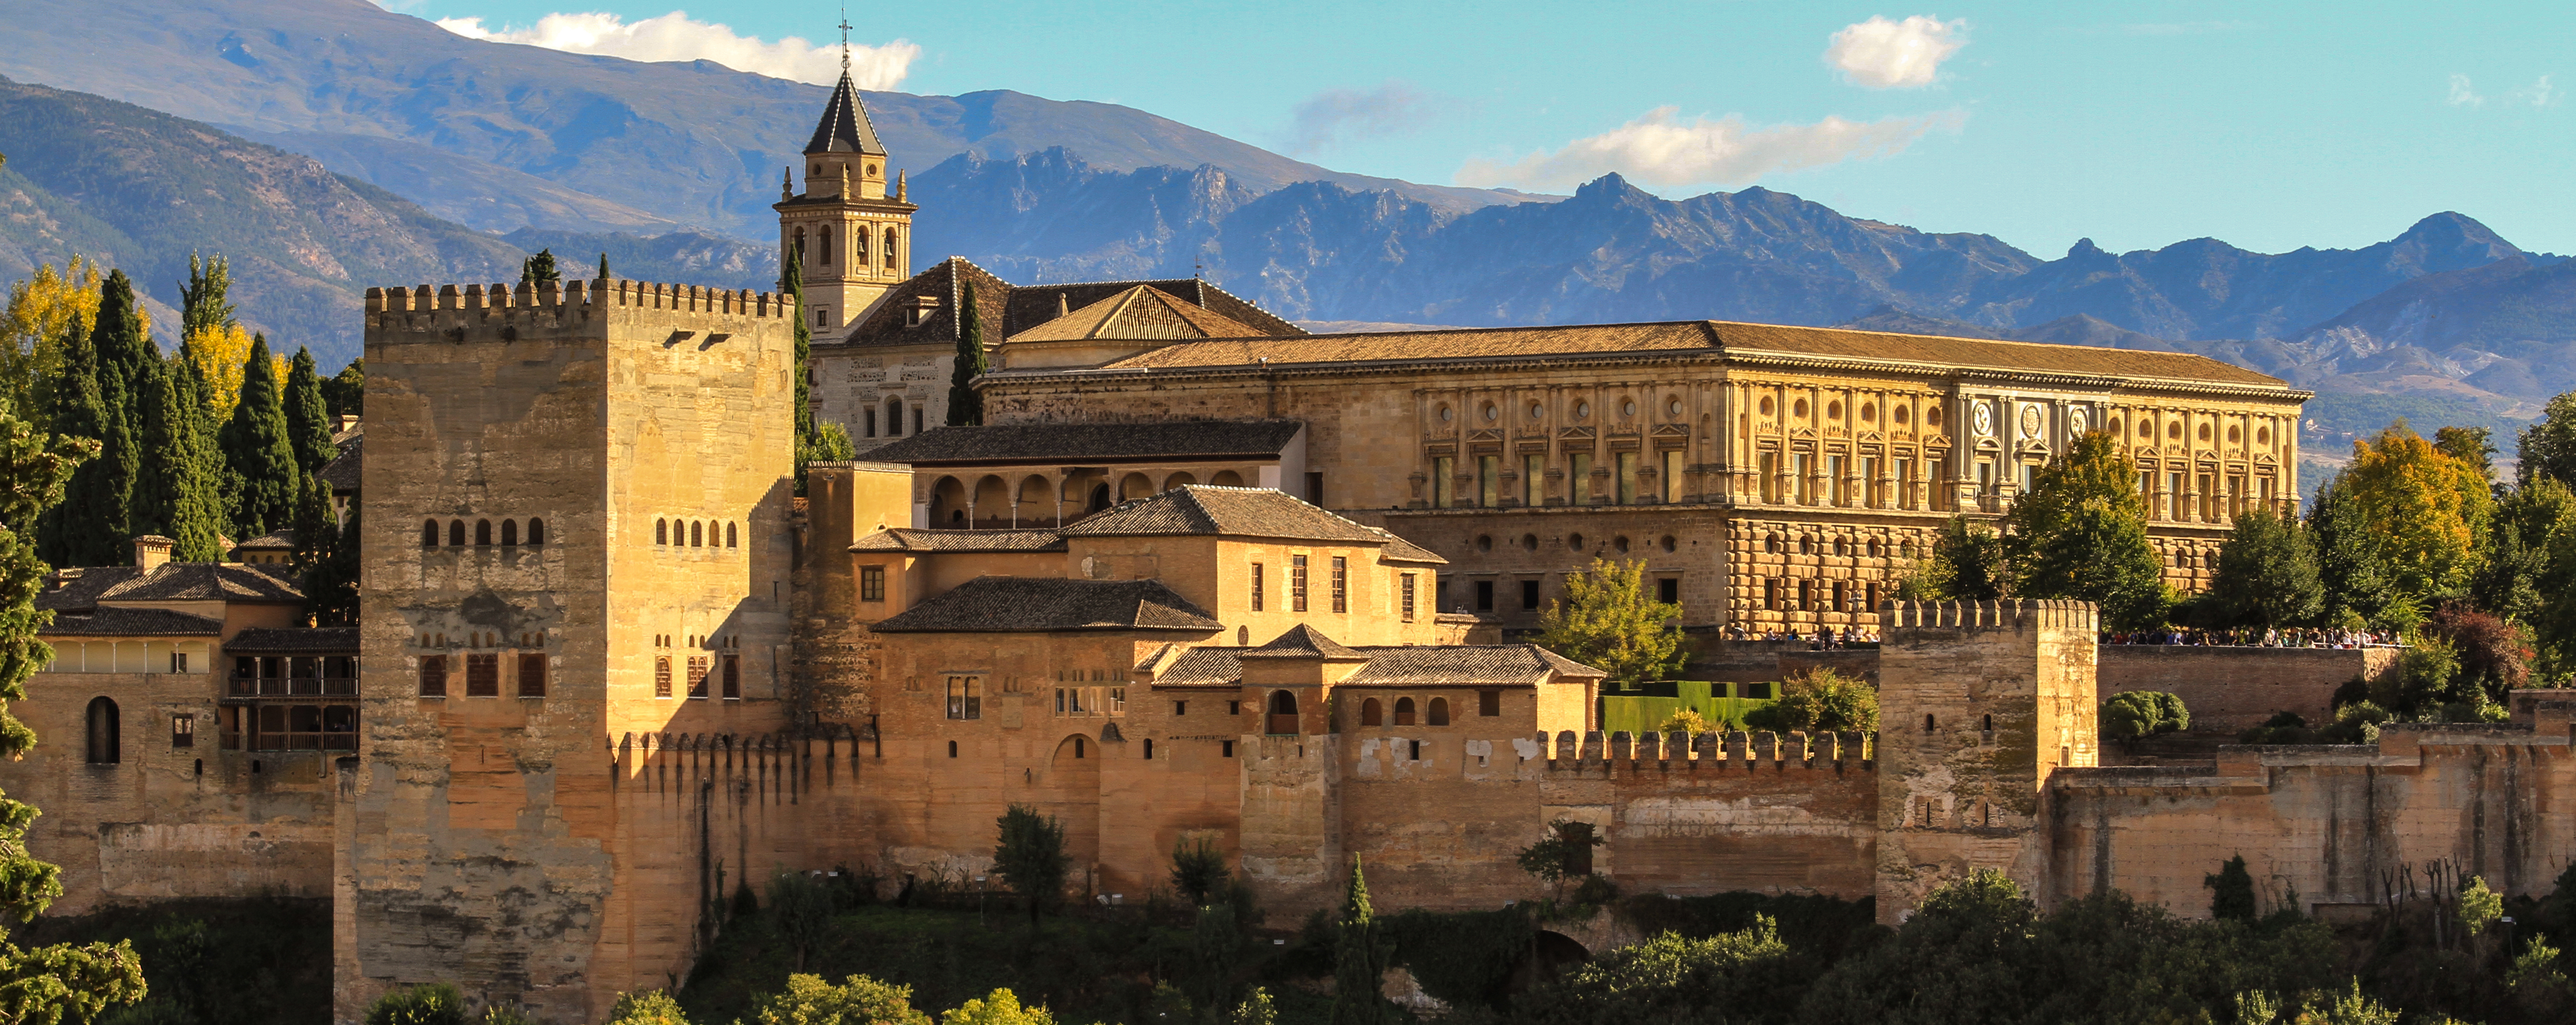 This image is the Alhambra castle, and one-time fortress- in Granada Spain. Behind it are mountains. 